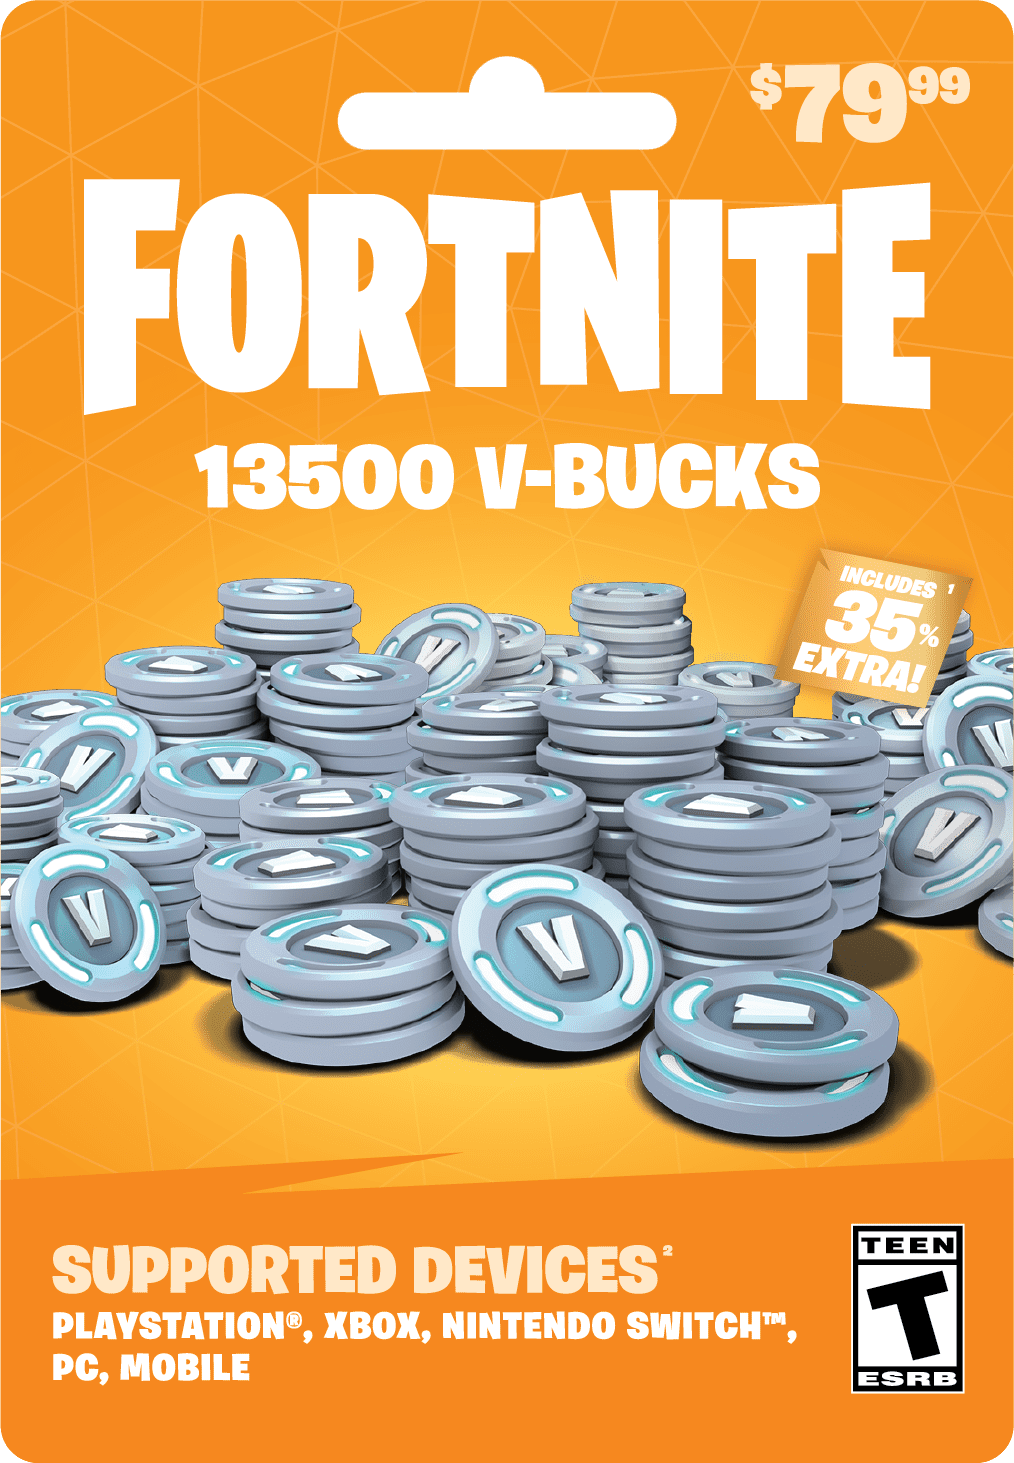 Fortnite 5,000 V-Bucks, (5 x $7.99 Cards) $39.95 Physical Cards, Gearbox 